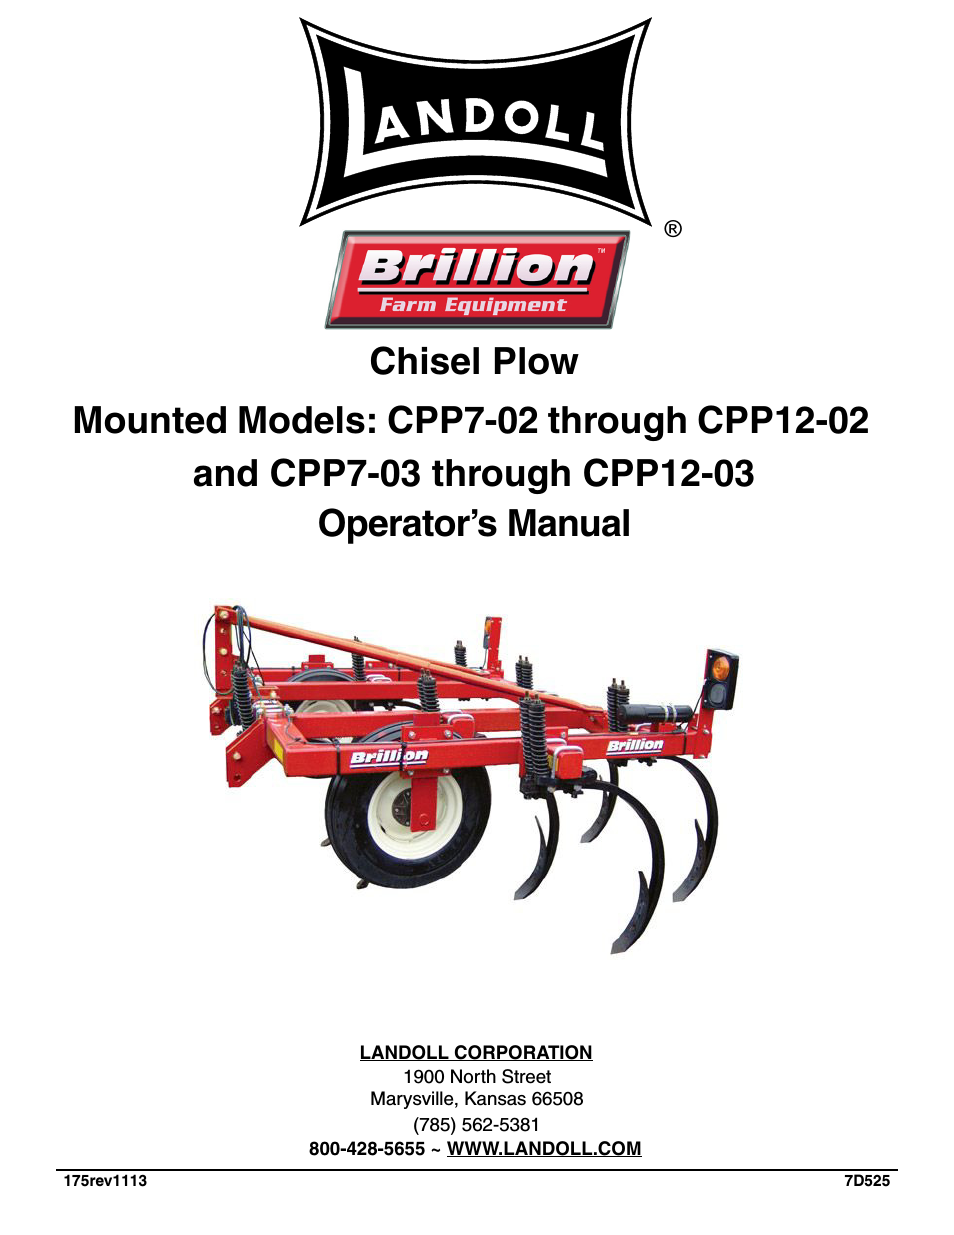 CPP7-03 through CPP12-03 Chisel Plow